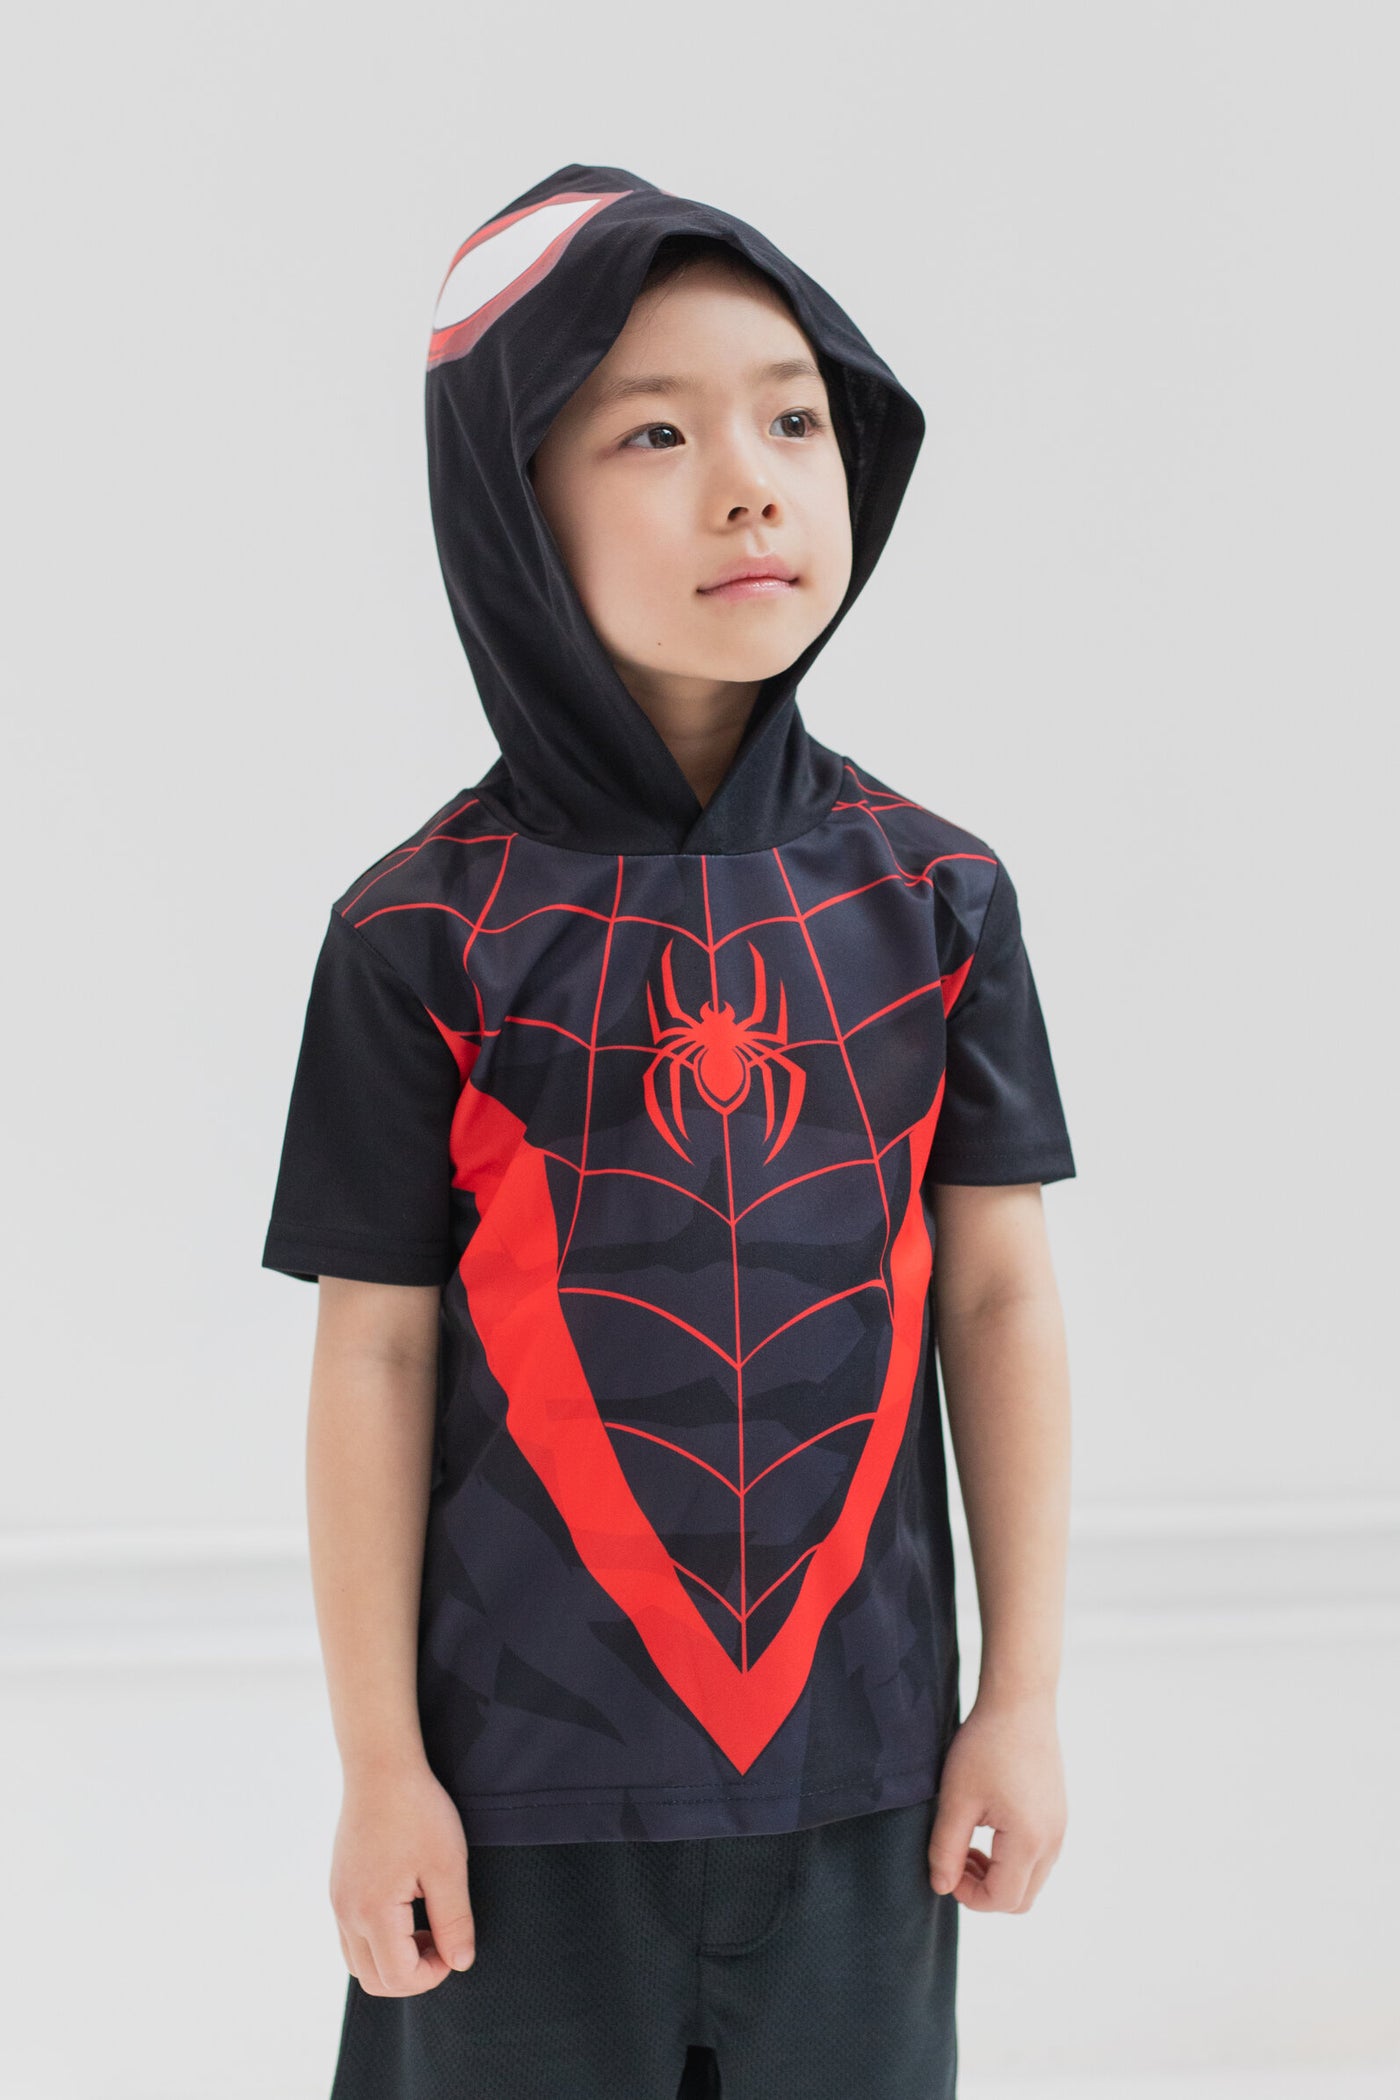 Marvel Spider-Man Miles Morales Athletic T-Shirt Mesh Shorts Outfit Set